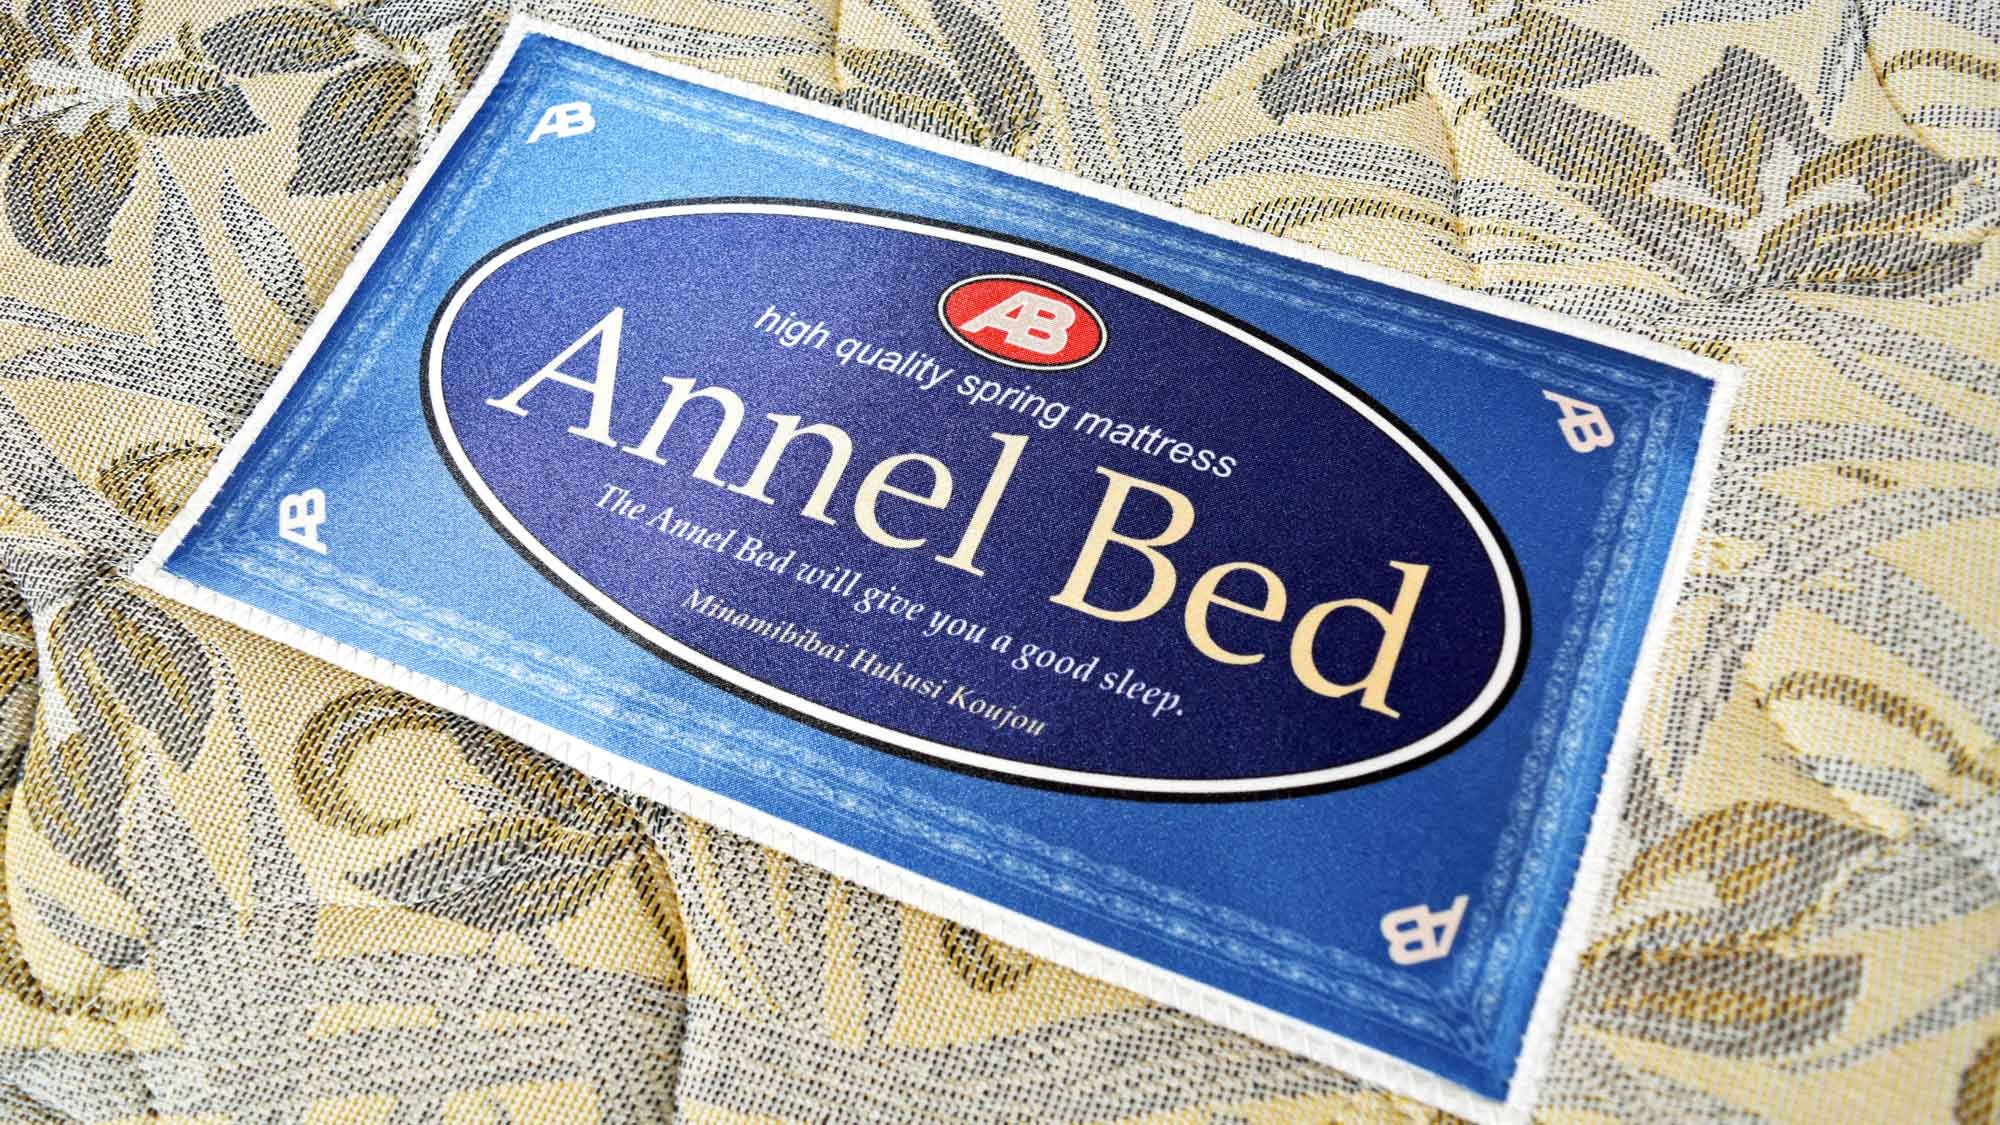 [Guest room] Annel bed has been introduced.